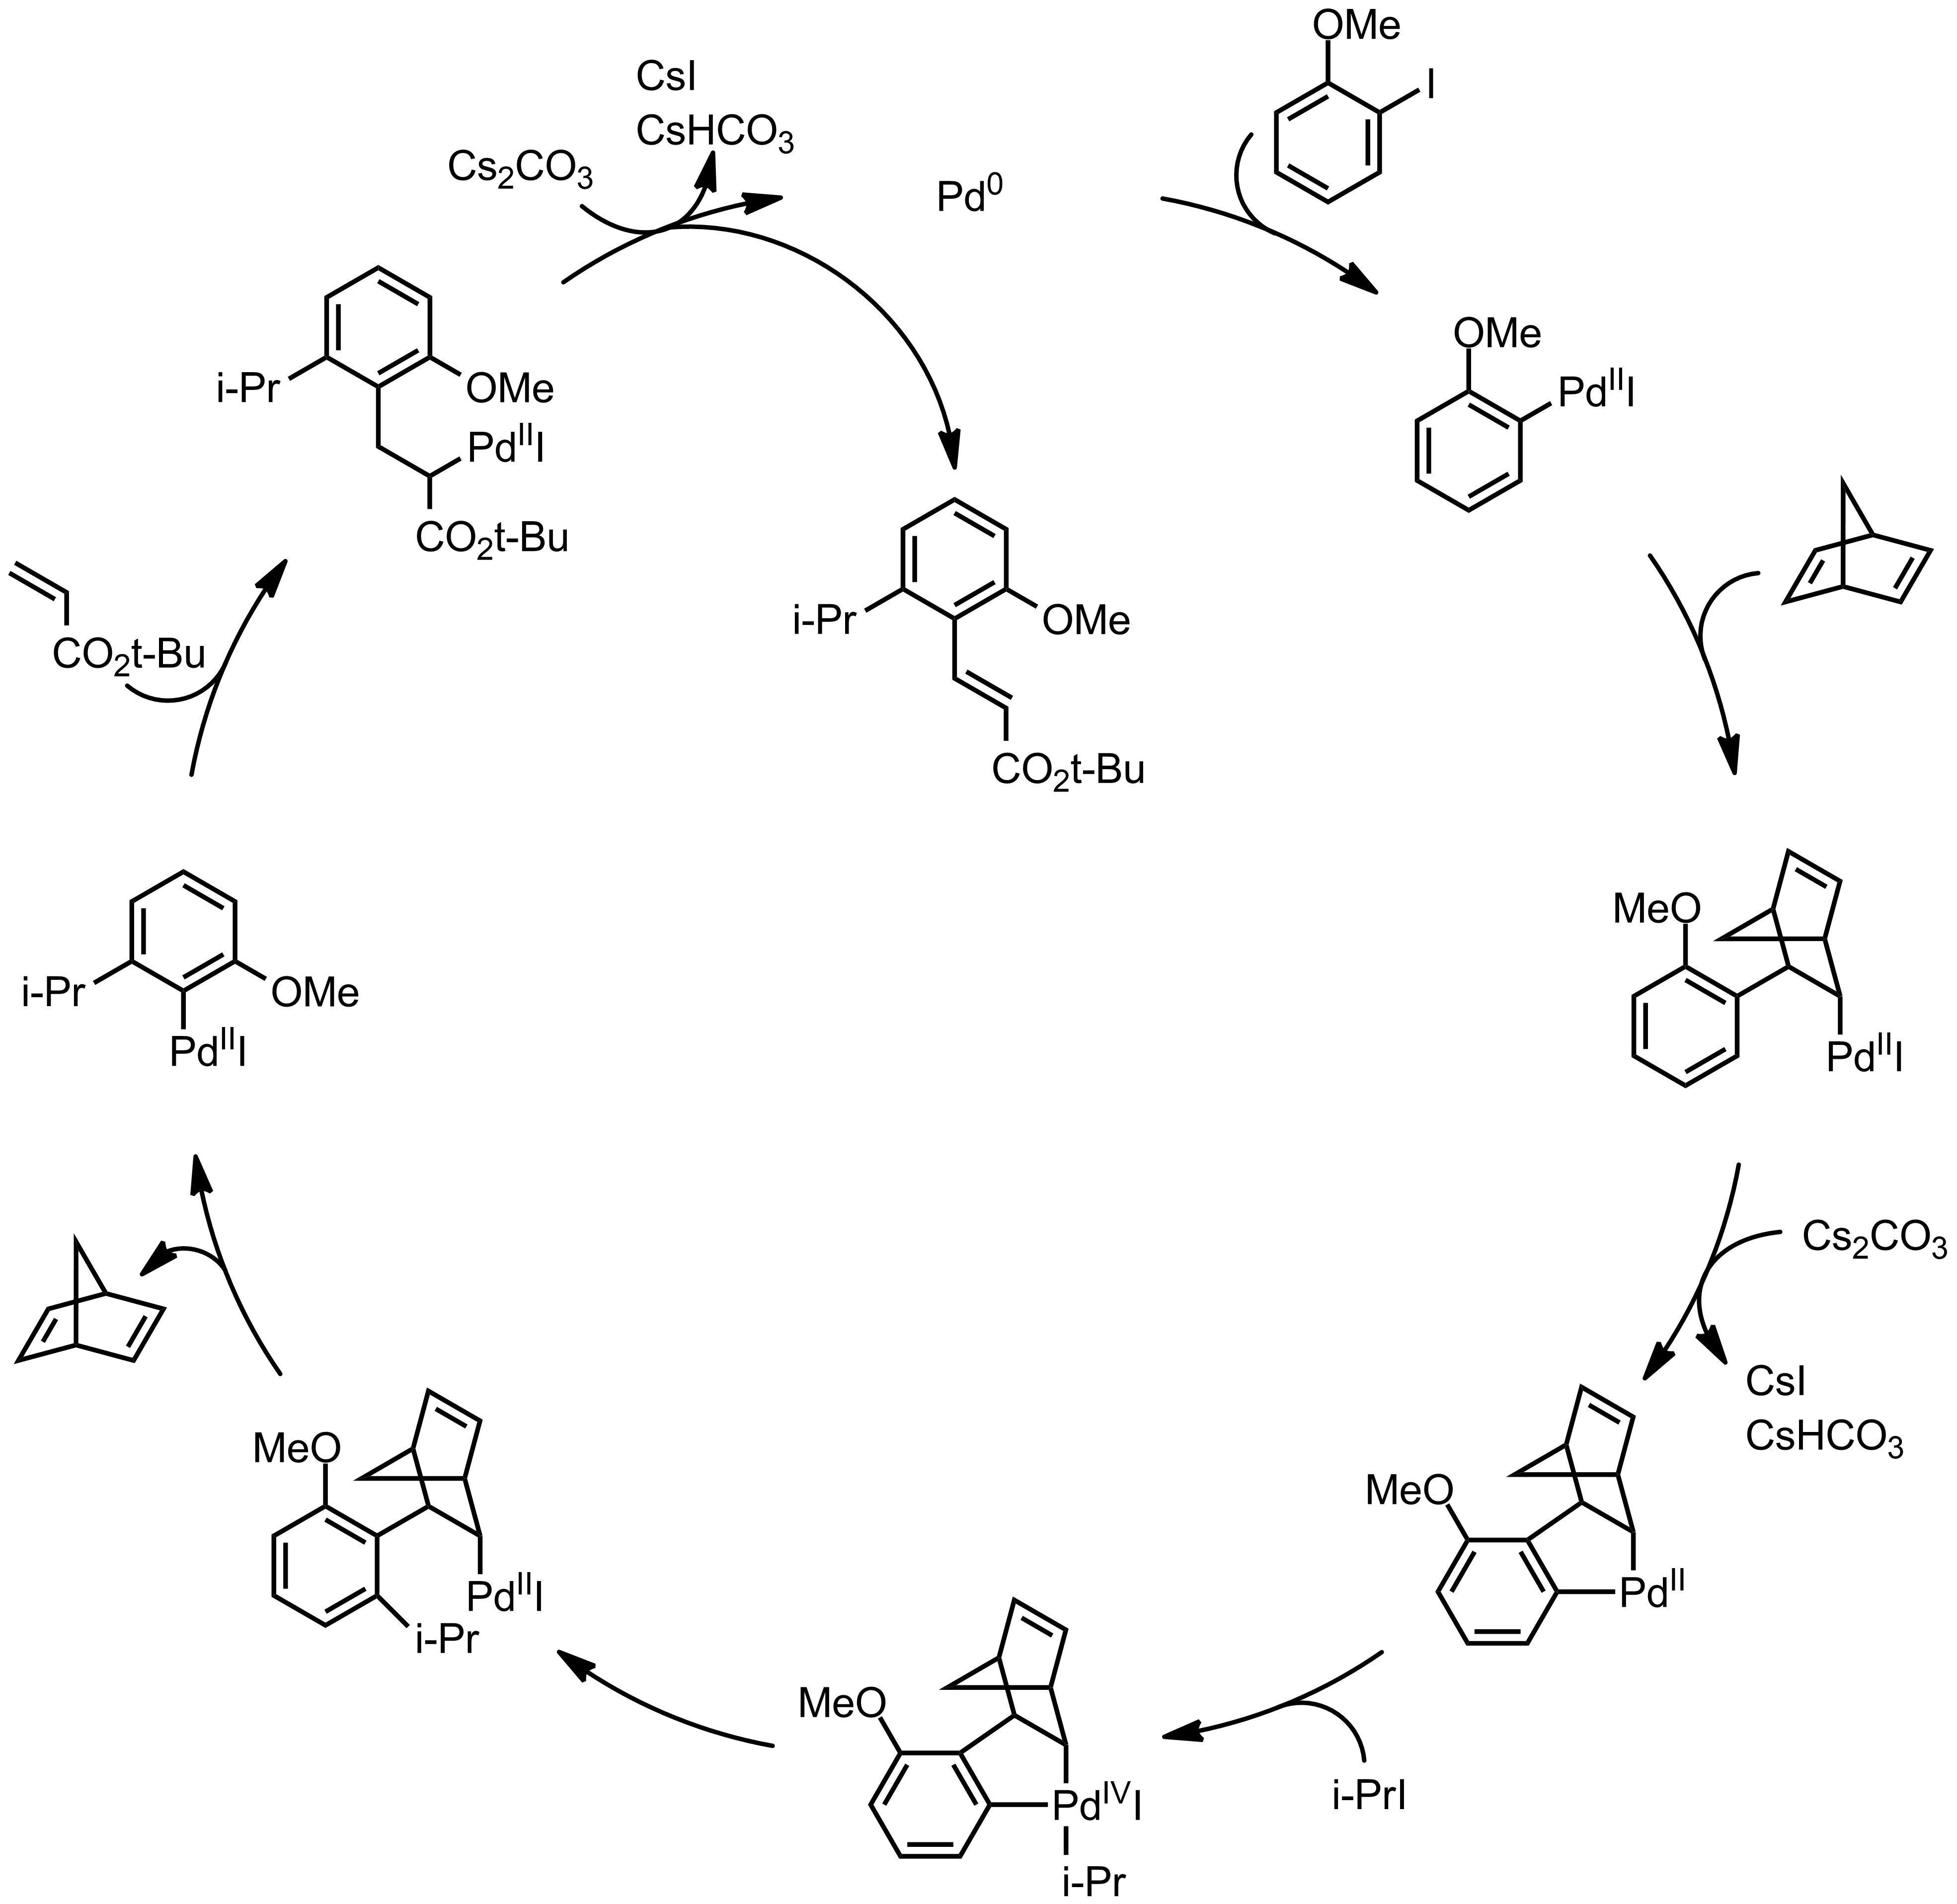 Mechanism of the Catellani Reaction